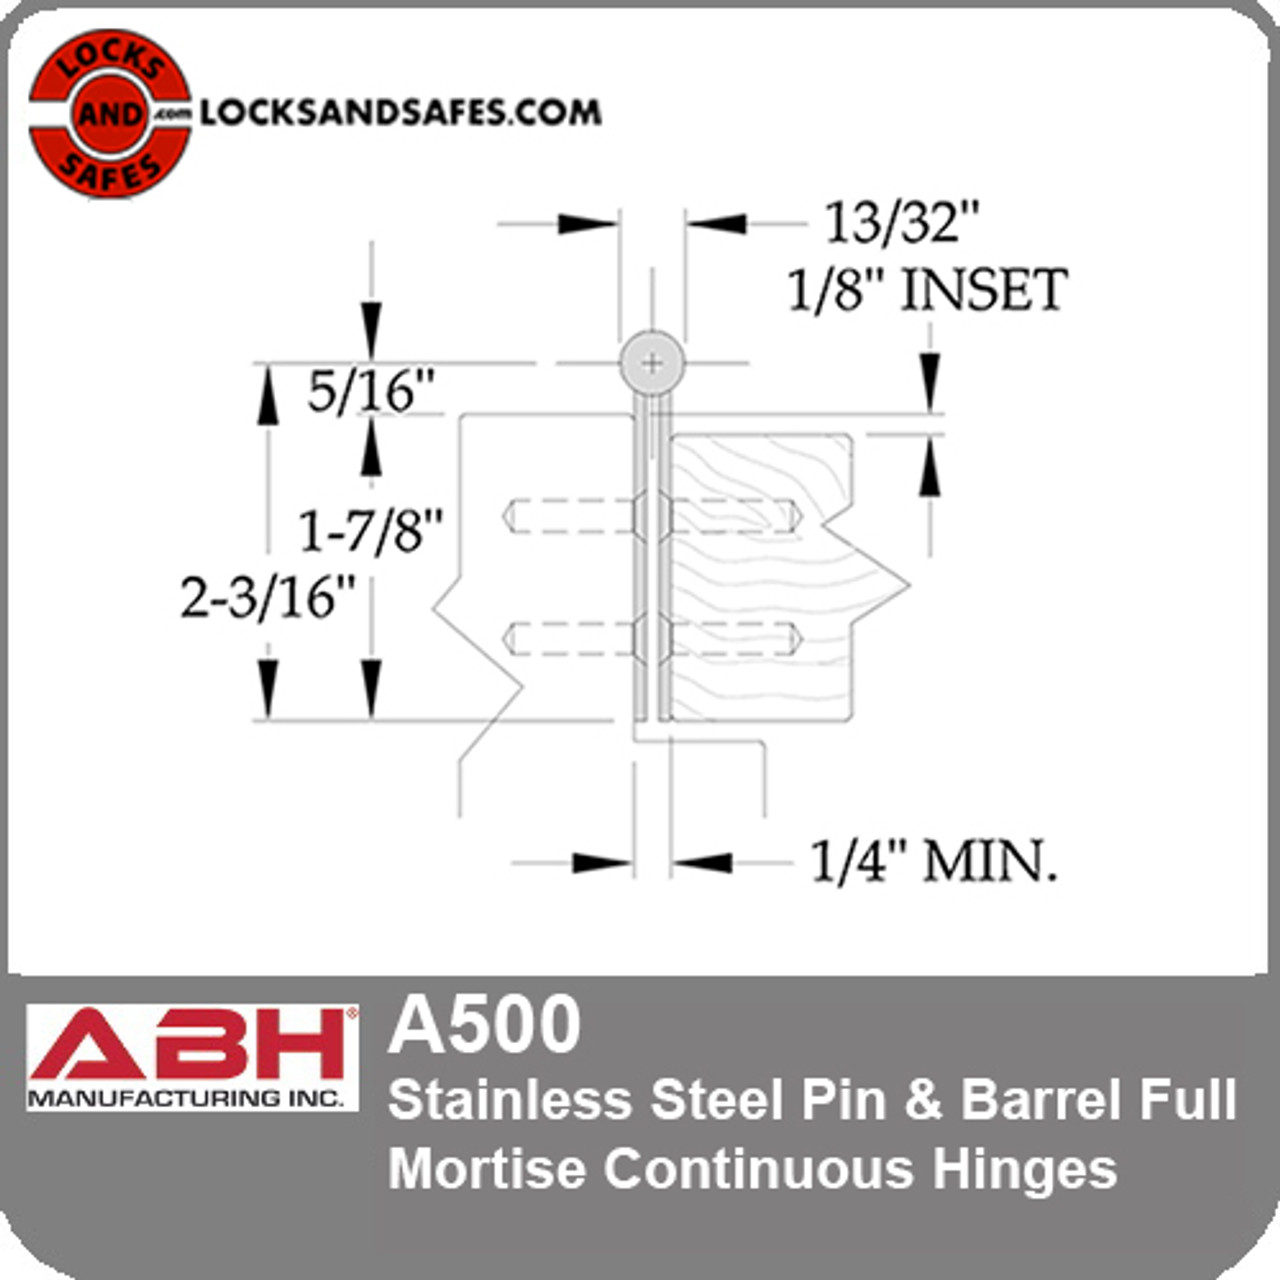 A500 Stainless Steel Pin & Barrel Continuous Hinges Full Mortise.  Architectural Builders Hardware Mfg. Inc.